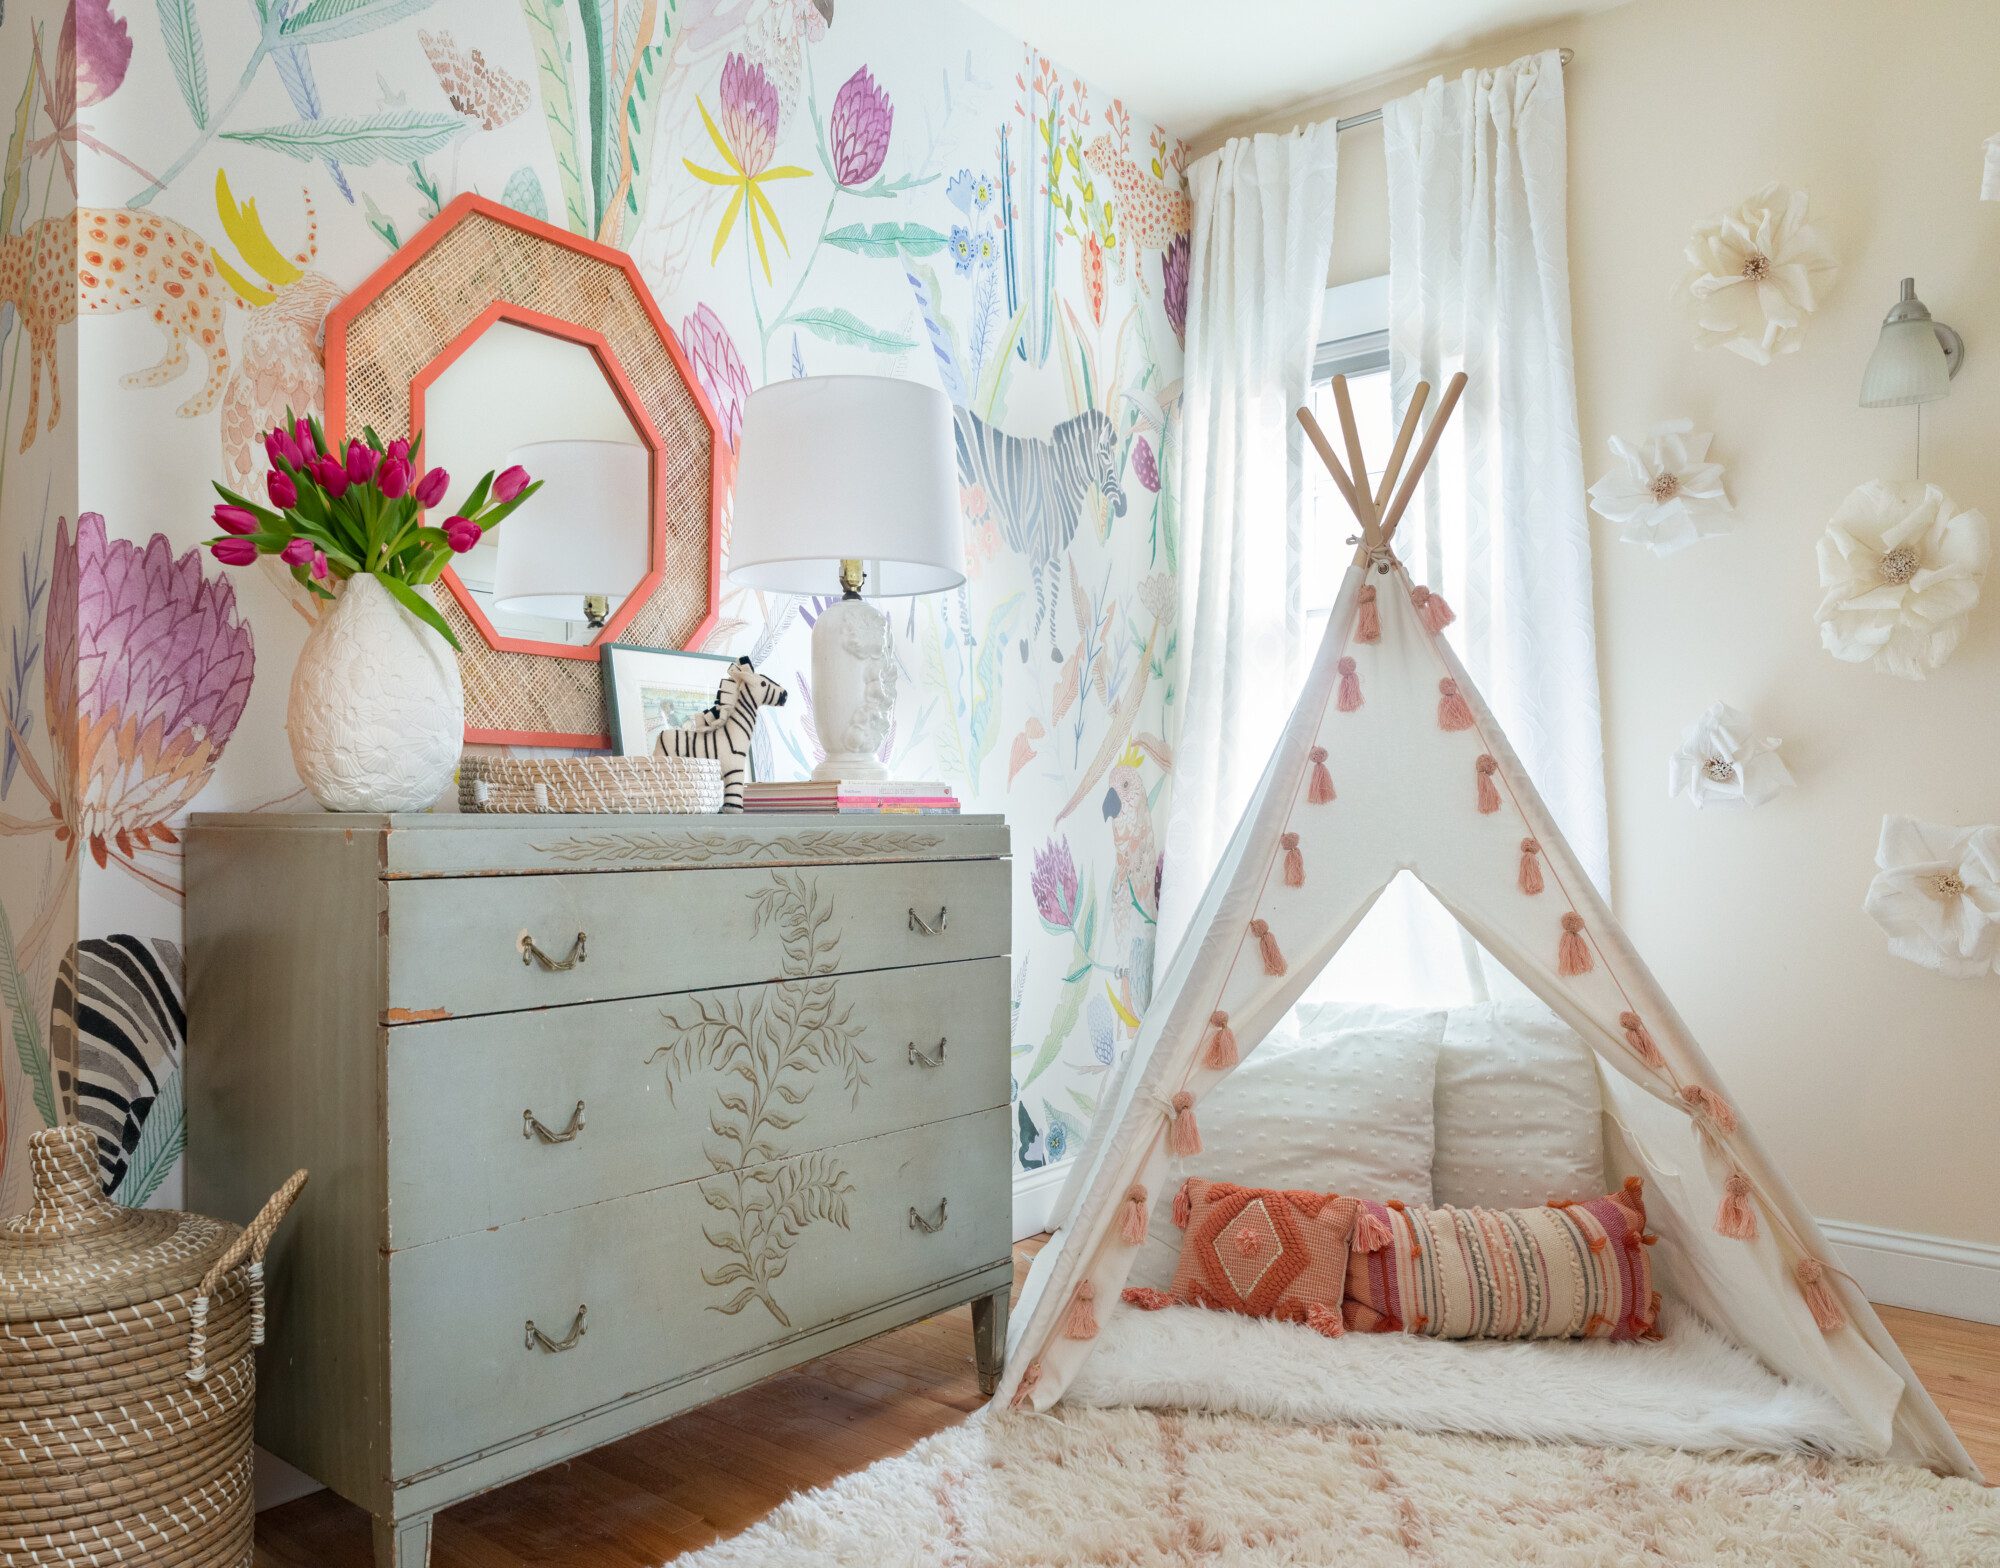 a small tent inside of a colorful nursery is the perfect place for kids to play